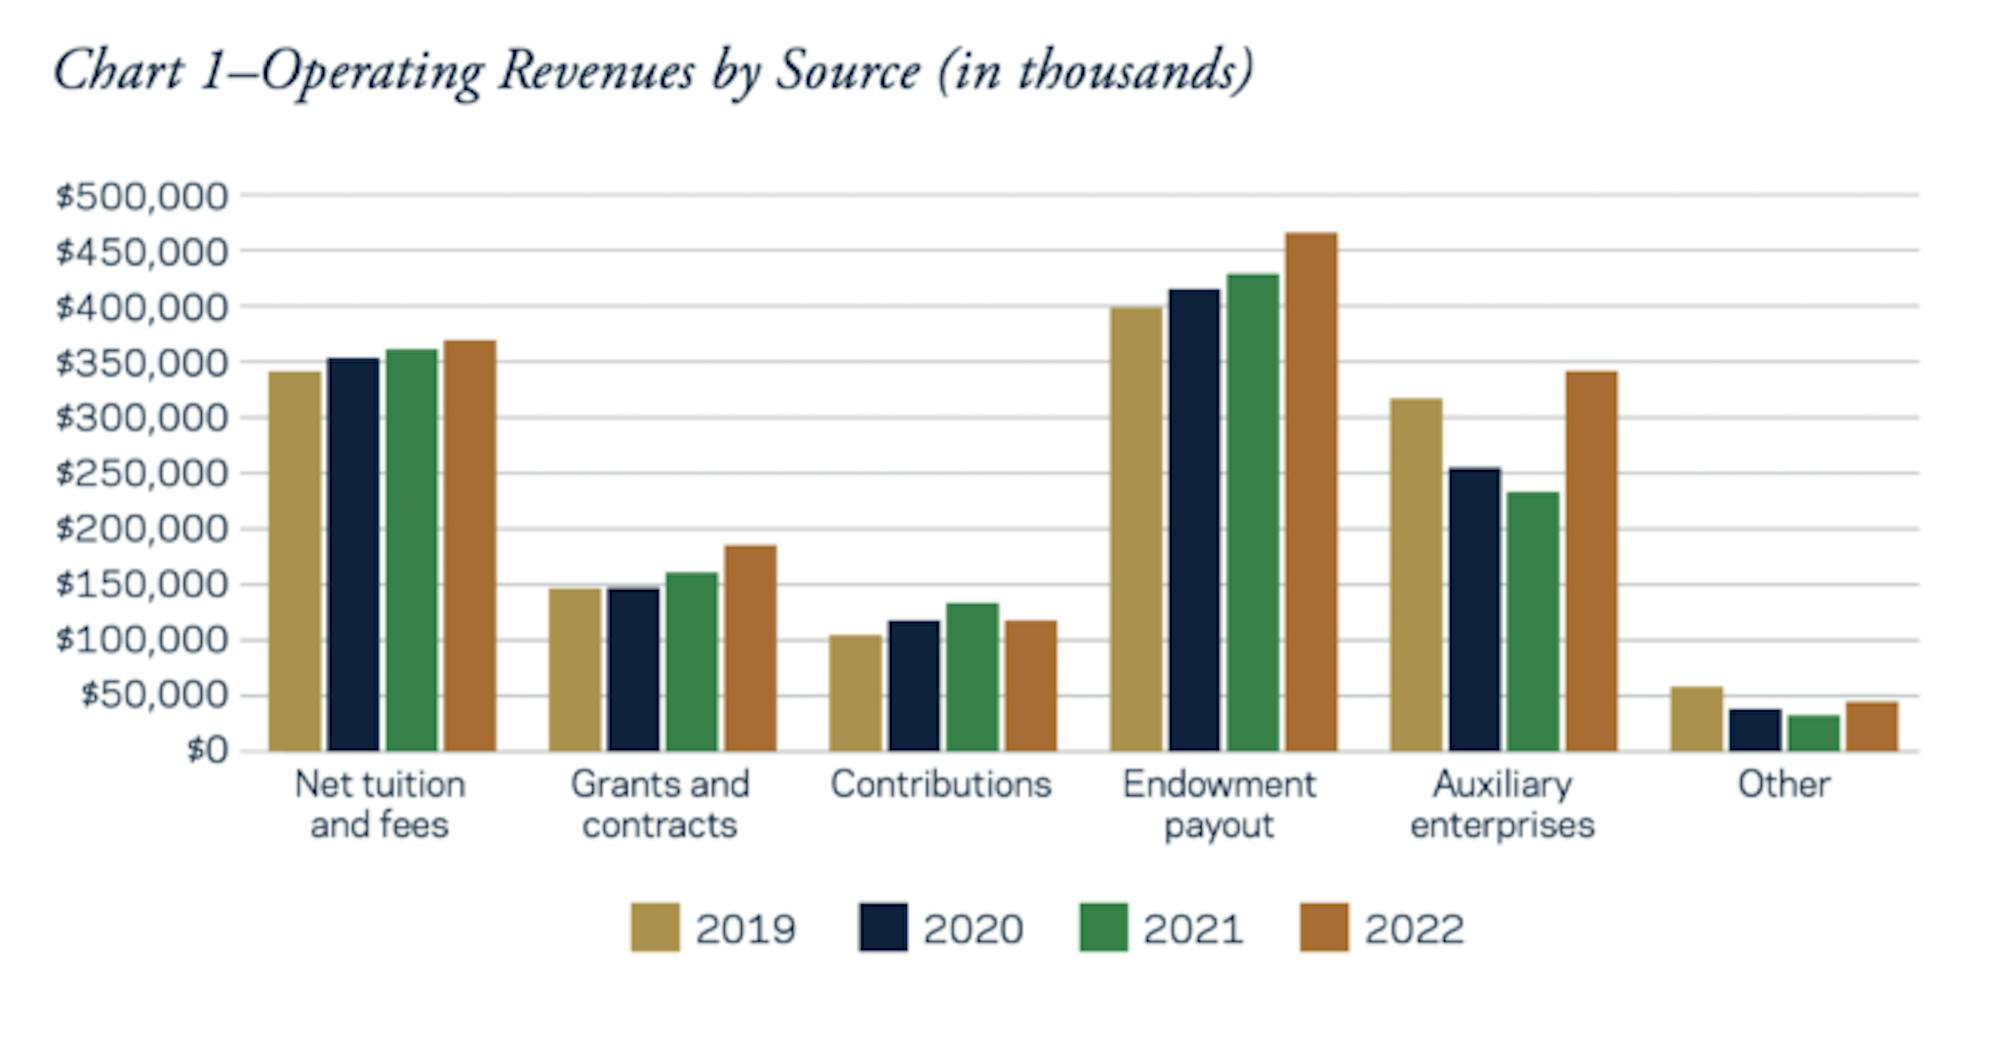 Chart showing revenues by source over the past four years.